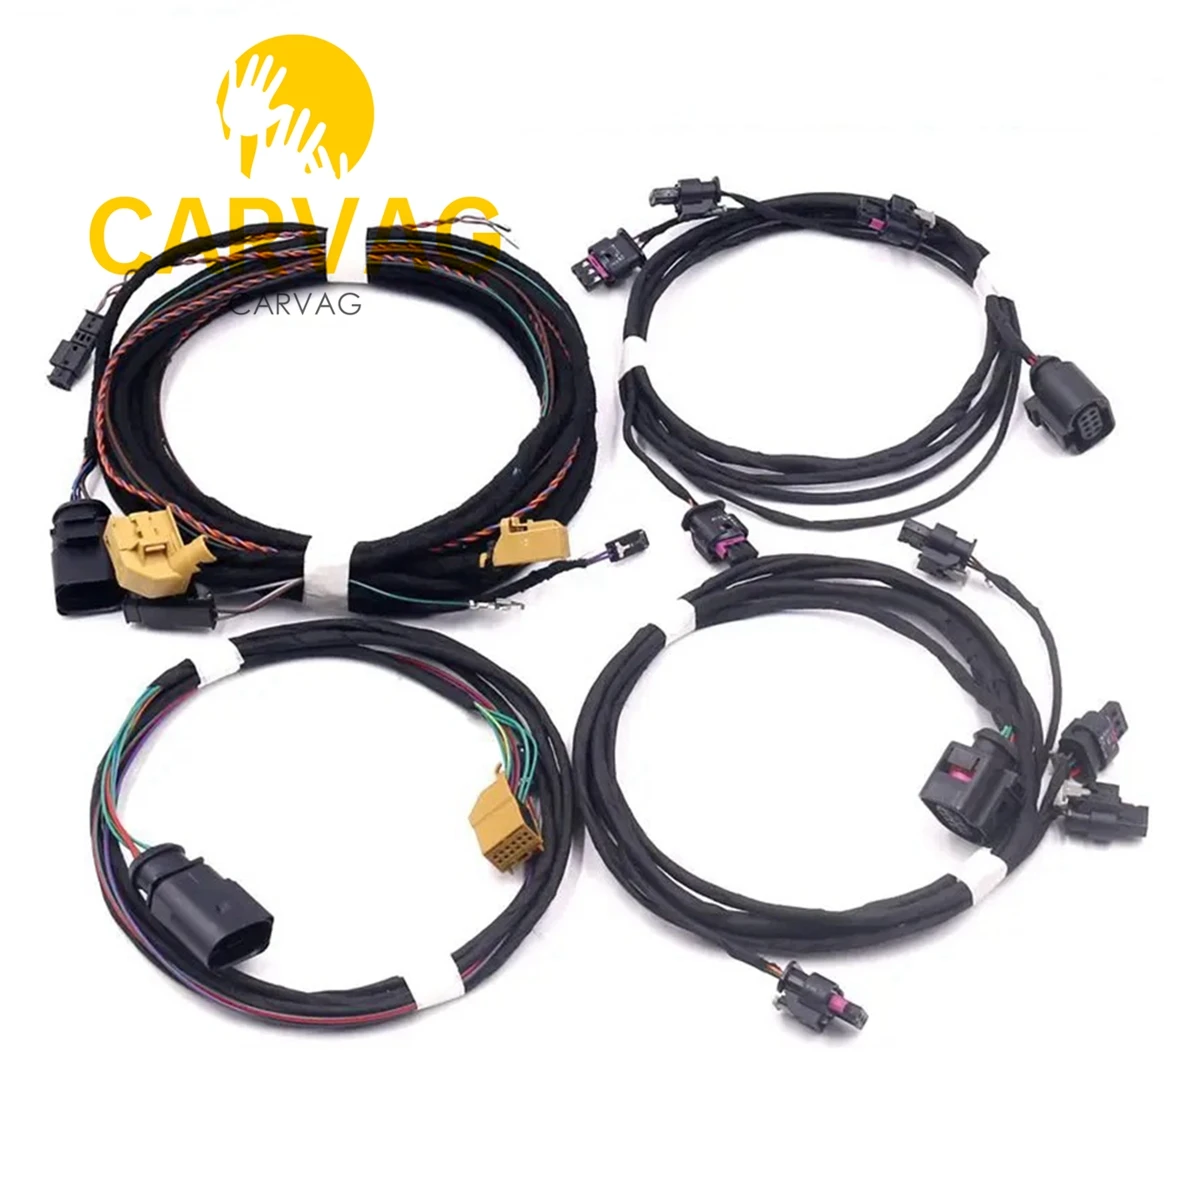 

For VW Golf 5 6 Passat B6 Touran JETTA MK5 Mk6 Tiguan Octavia Polo Front and Rear 8K PDC OPS Install Harness Cable